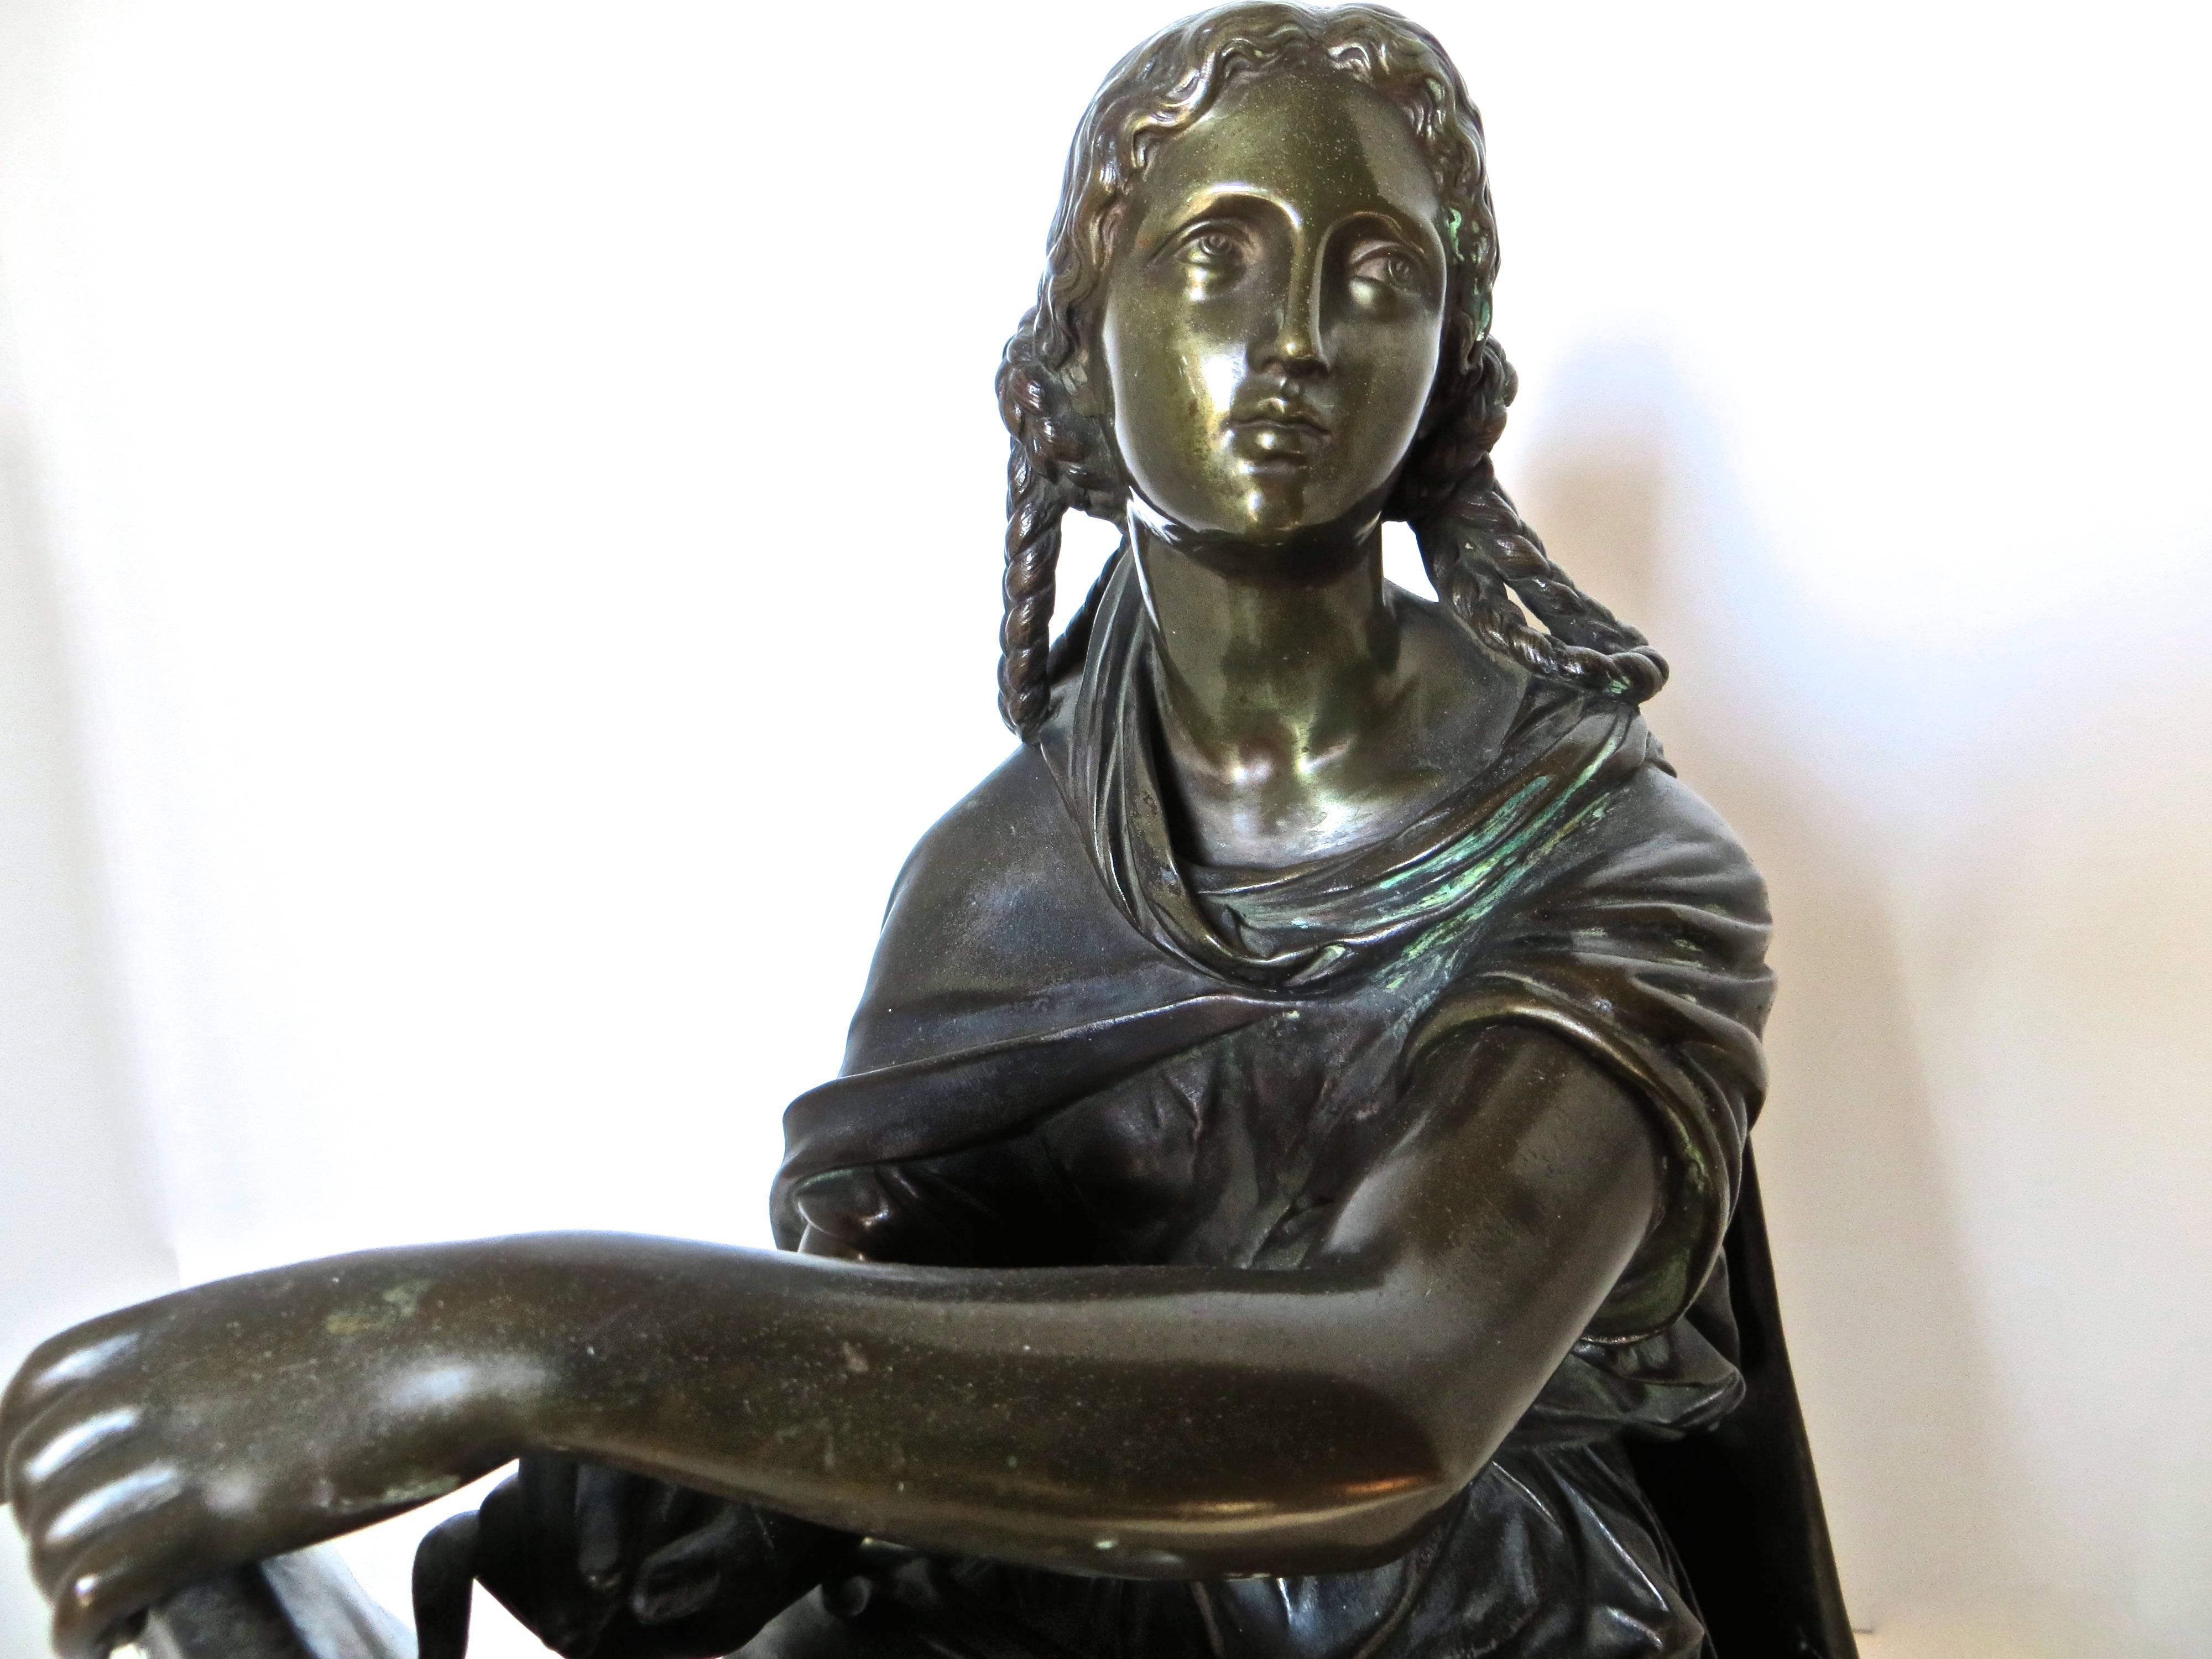 Aesthetic Movement 19th Century Bronze by Moreau Sitting Figure of a Lady 'Student or Scholar' For Sale